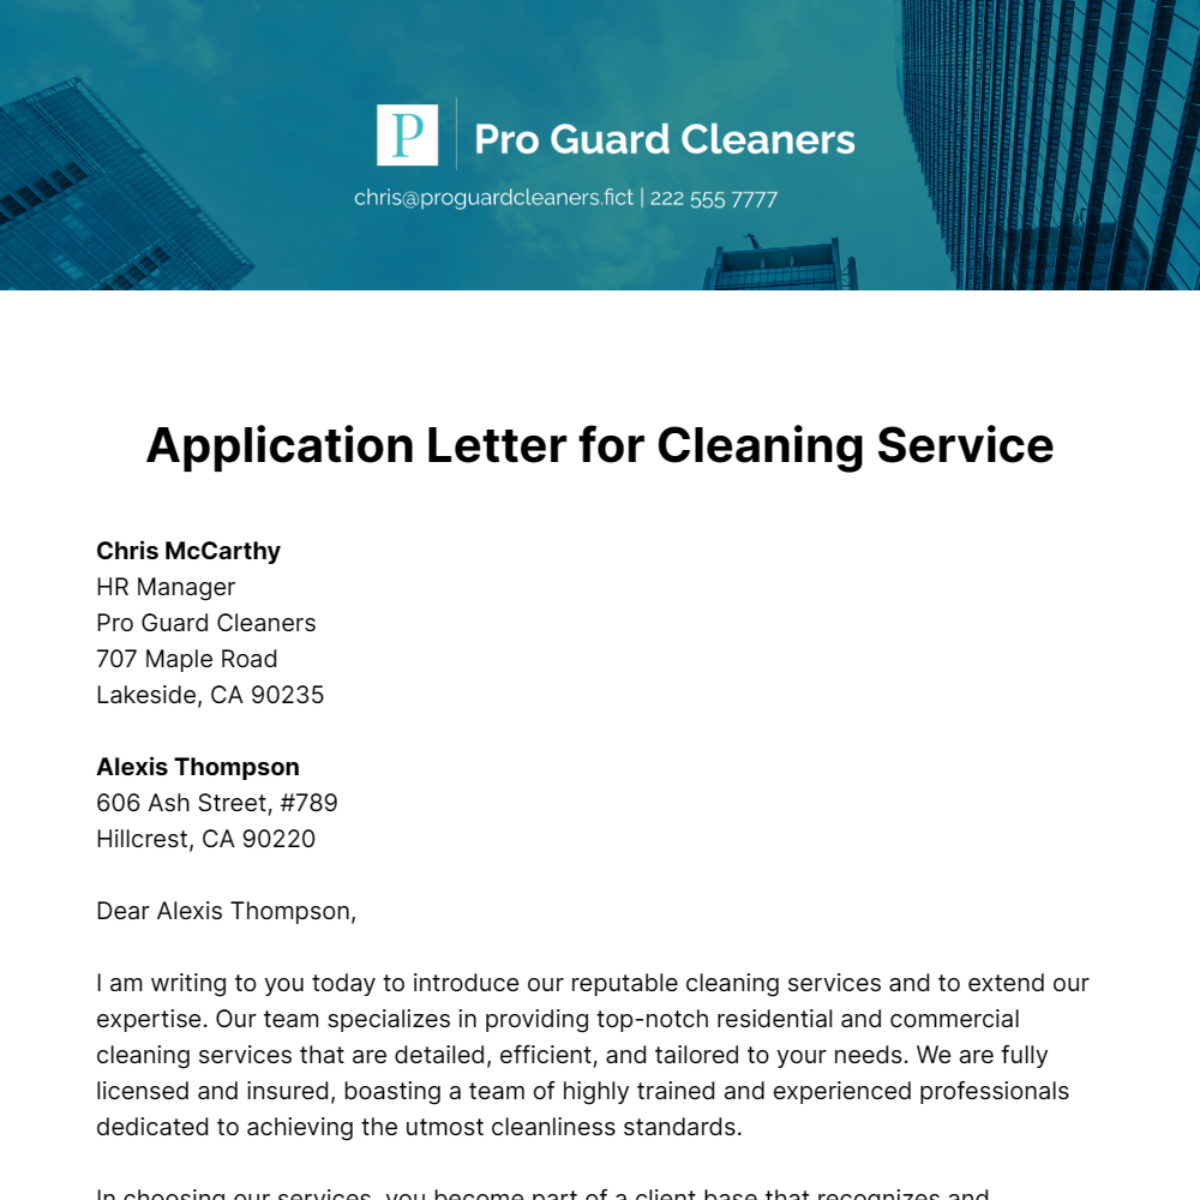 Application Letter for Cleaning Service Template